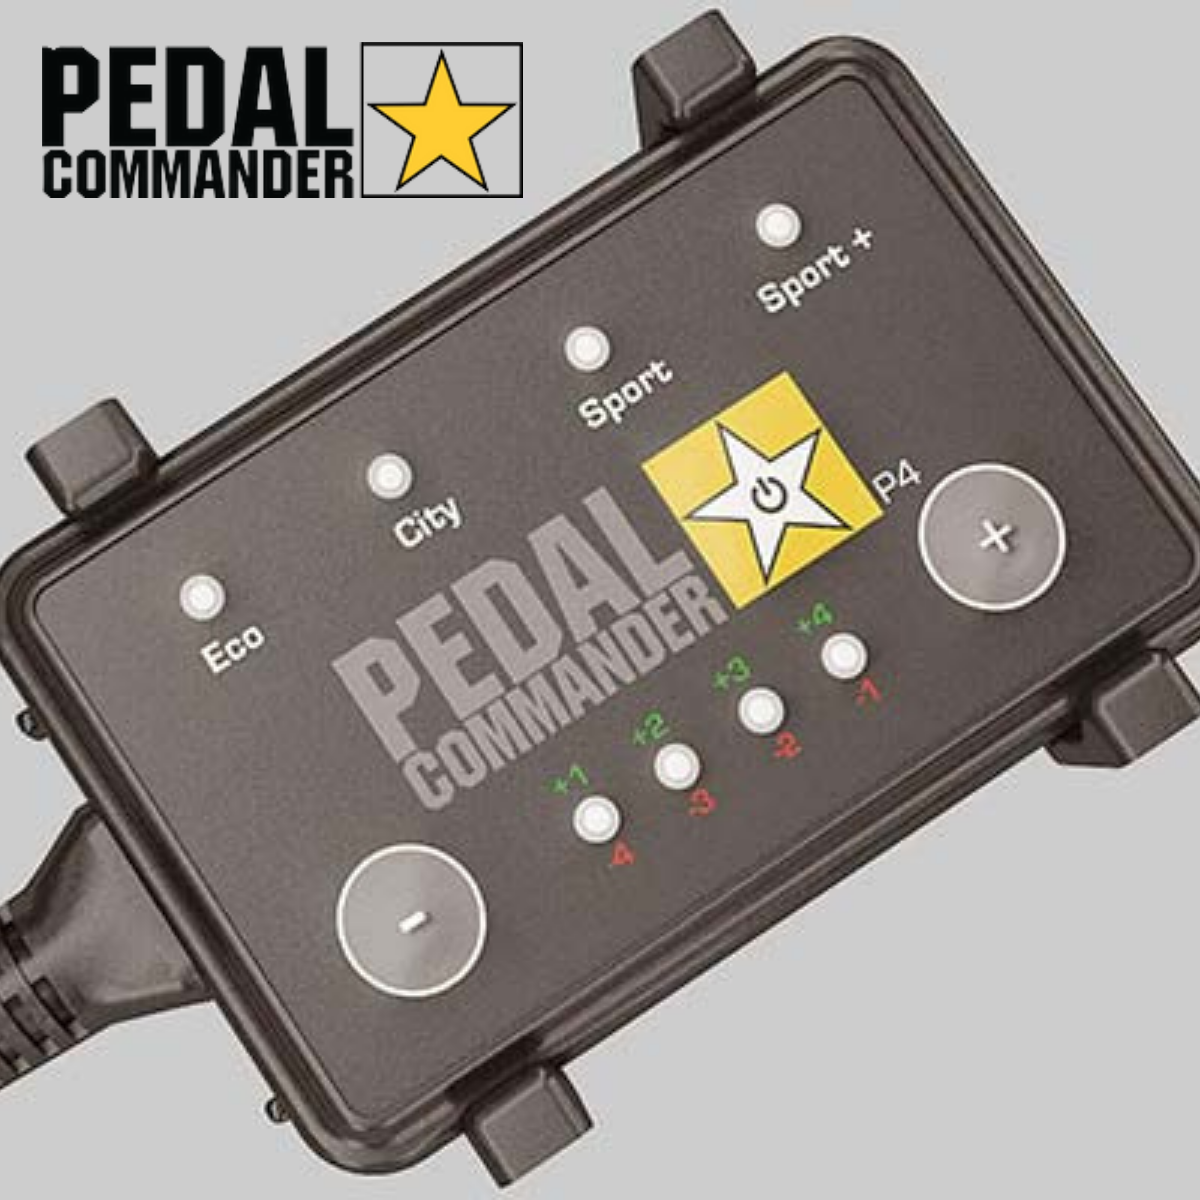 Reduce Throttle Lag With The Pedal Commander